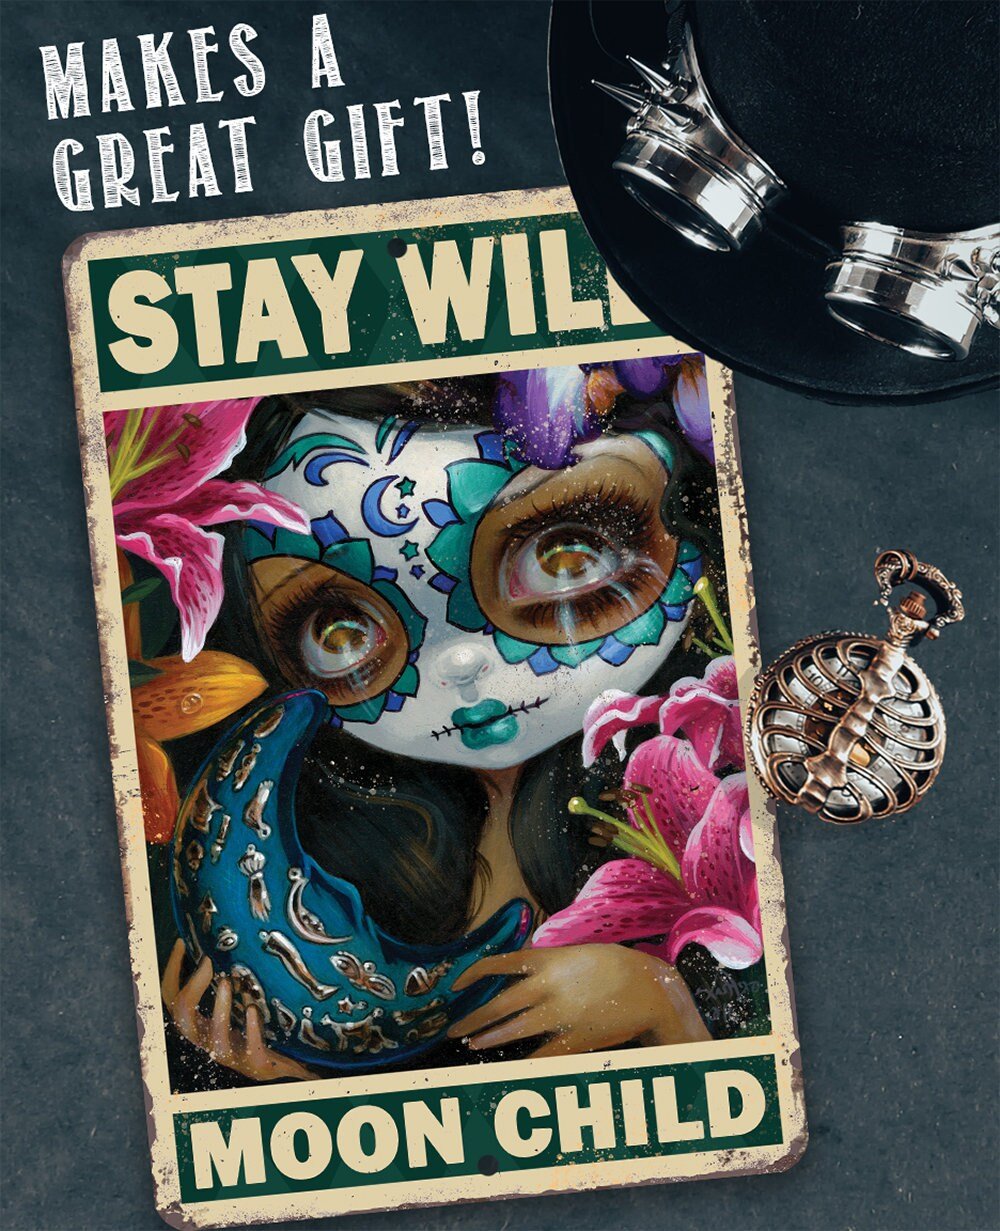 Stay Wild Moon Child - 8" x 12" or 12" x 18" Aluminum Tin Awesome Gothic Metal Poster Lone Star Art 